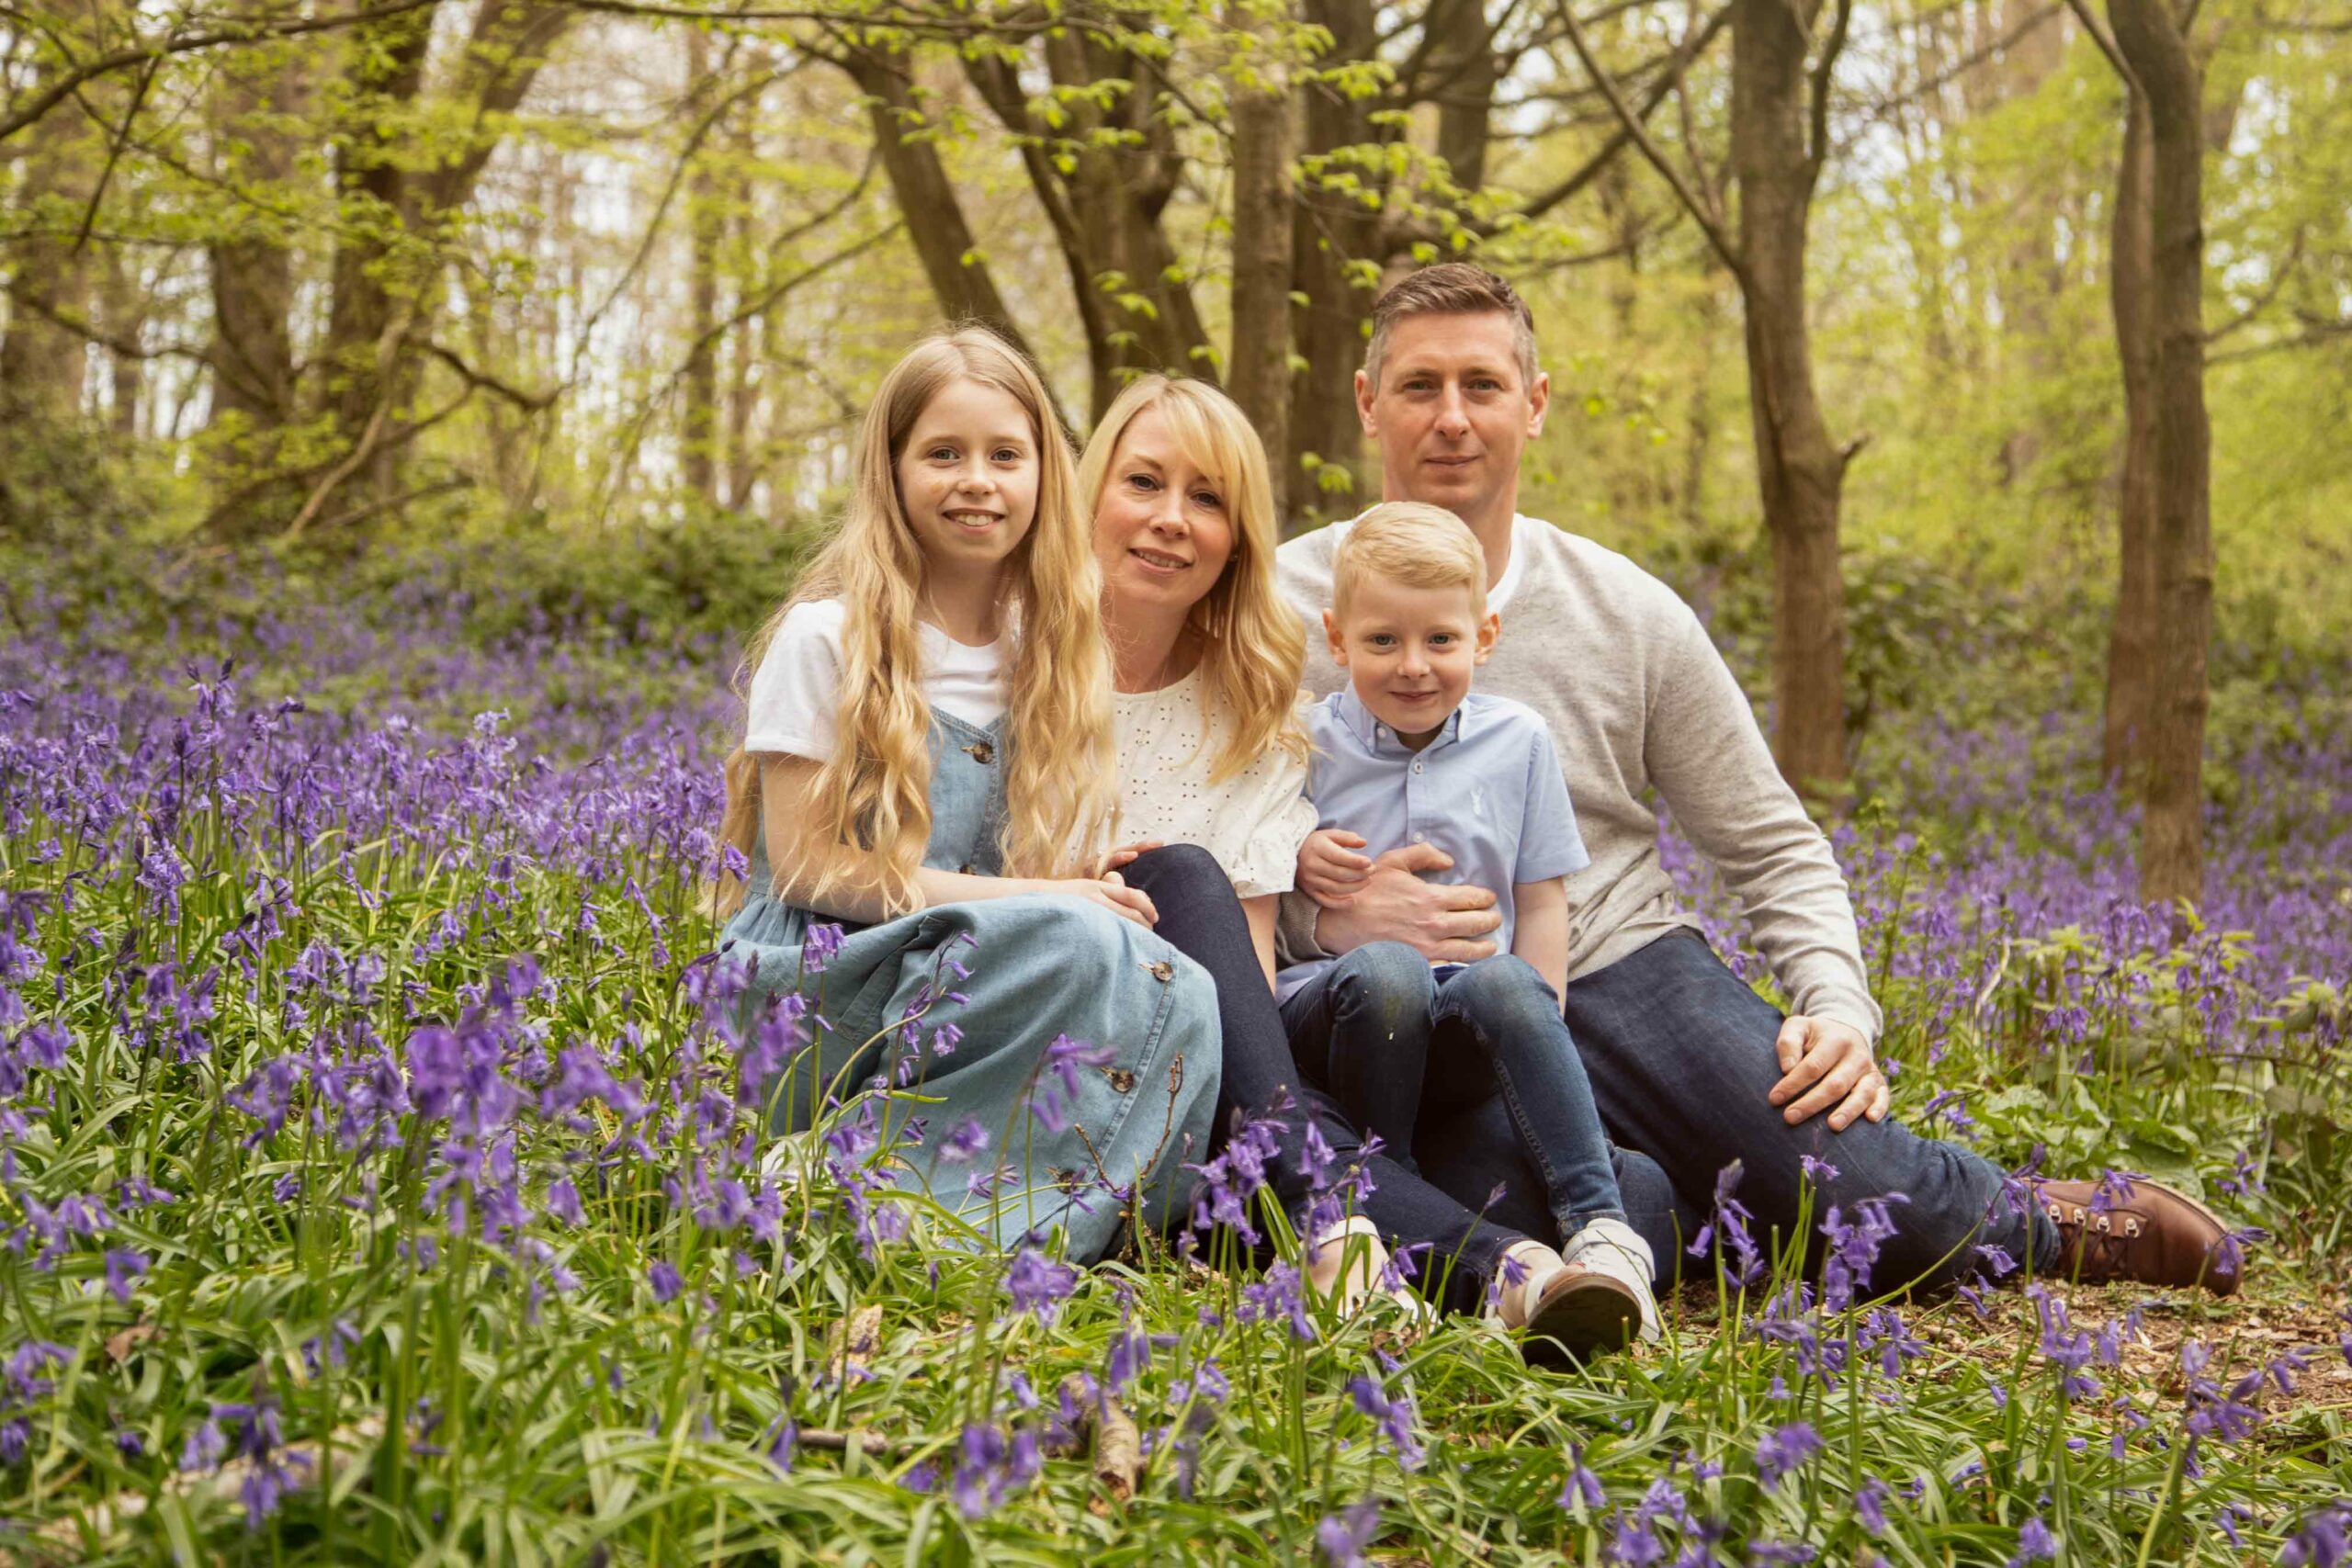 Family Photographer based in Medway, Kent. Photo of family sitting in bluebell covered woodland